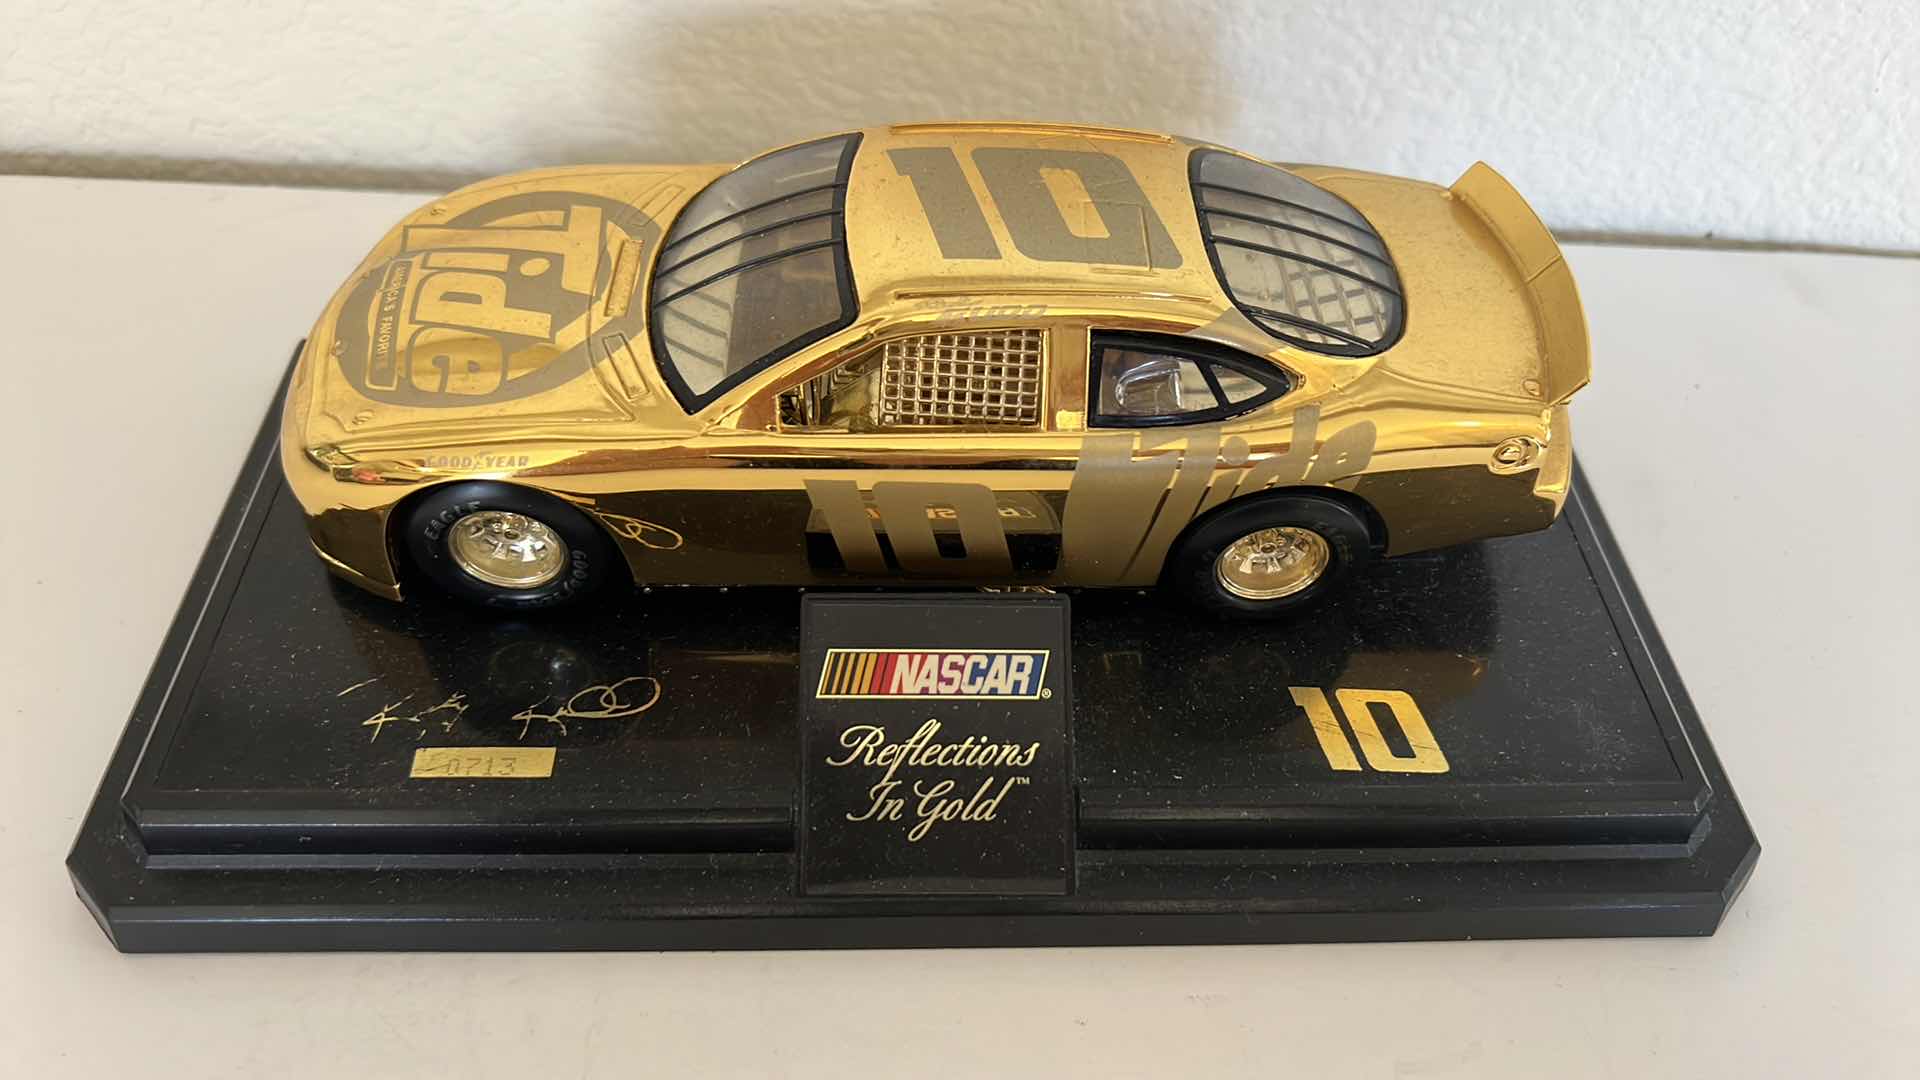 Photo 2 of FORD TAURUS NASCAR “REFLECTIONS IN GOLD” DIE CAST MODEL CAR